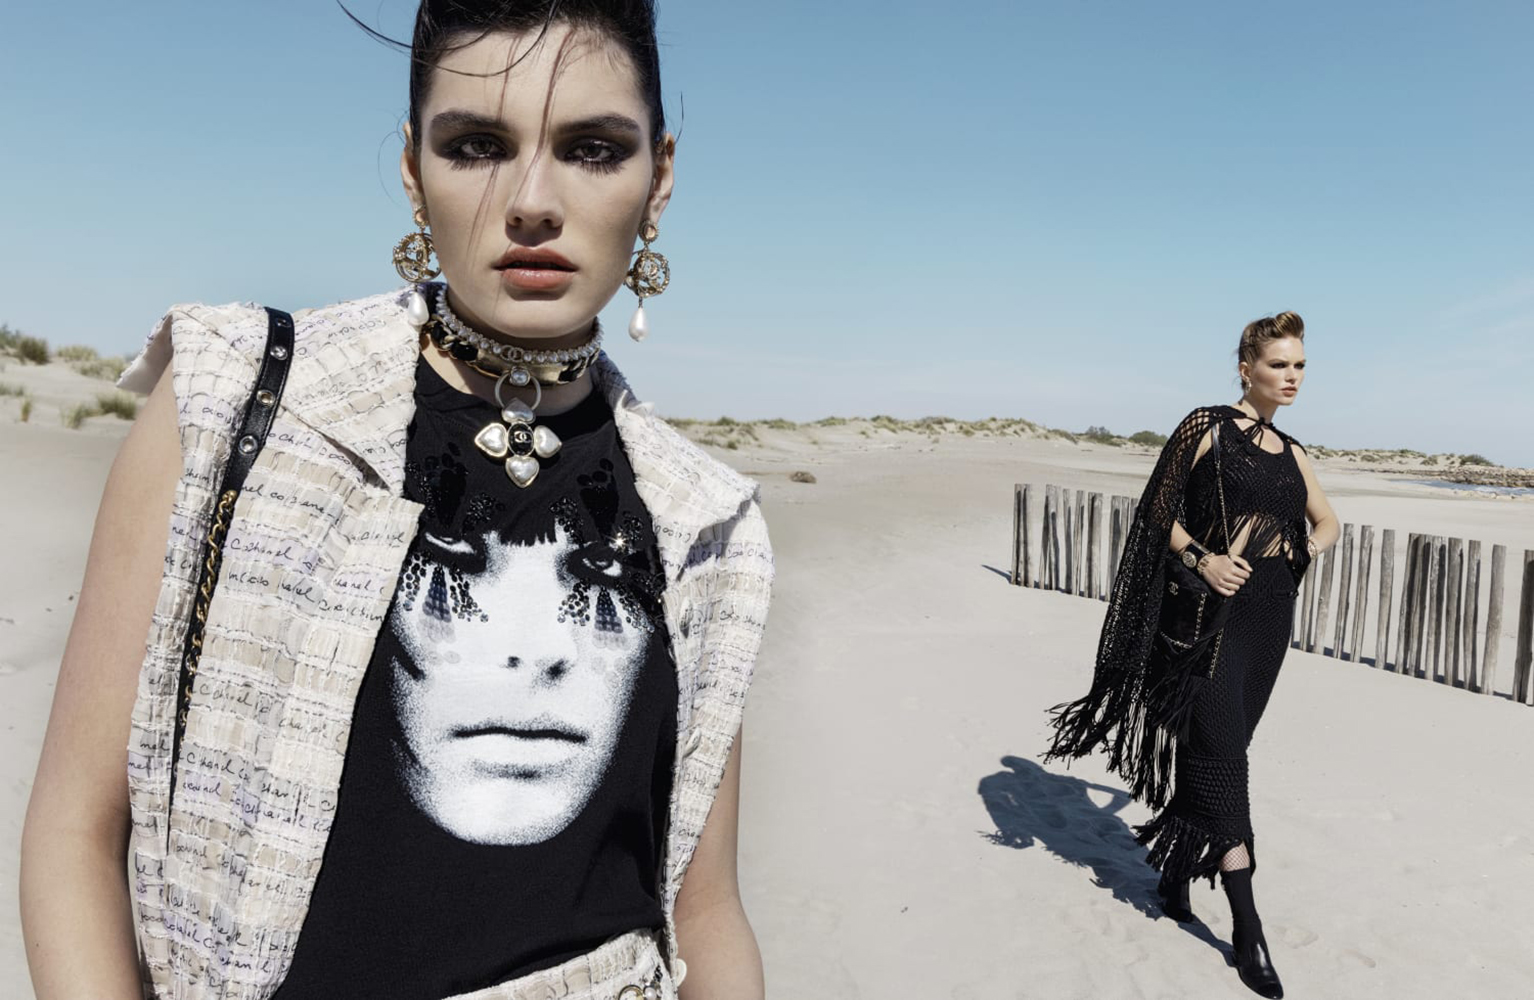 CHANEL Cruise collection Inez & Vinoodh signed the new campaign